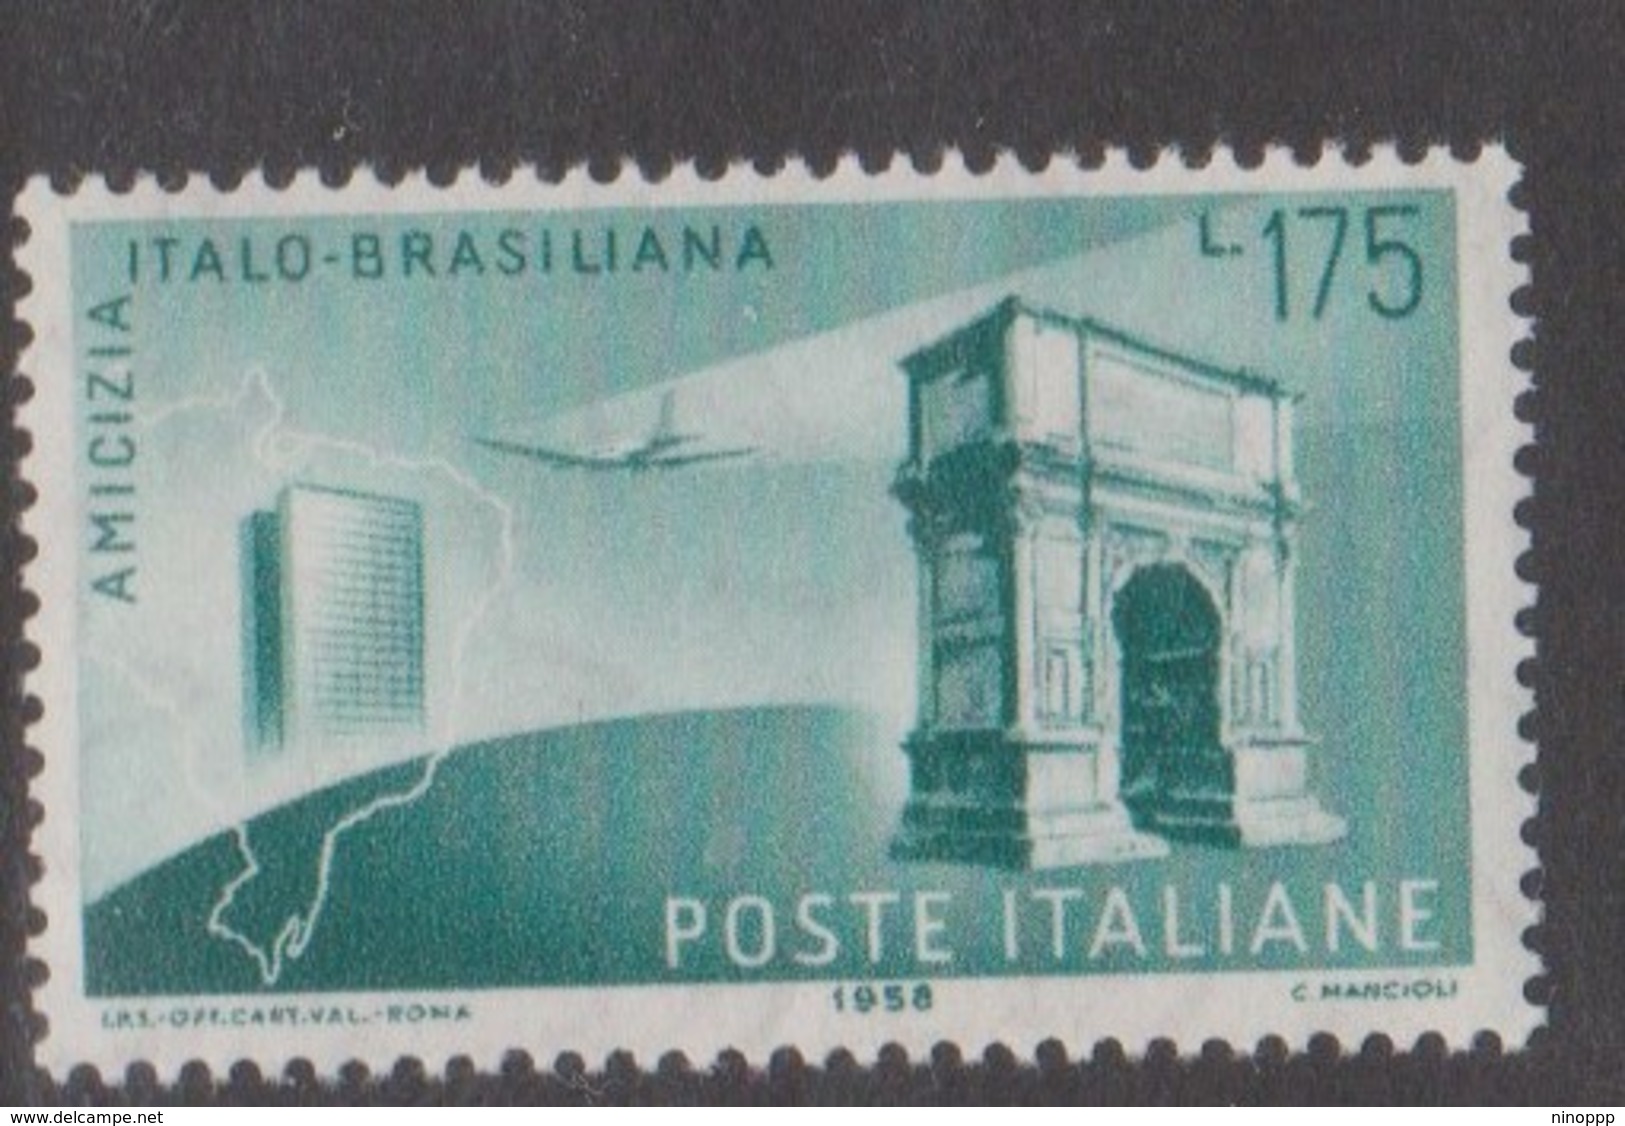 Italy Republic S 837 1958 Italy-Brasil Friendship,mint Never  Hinged - 1946-60: Mint/hinged